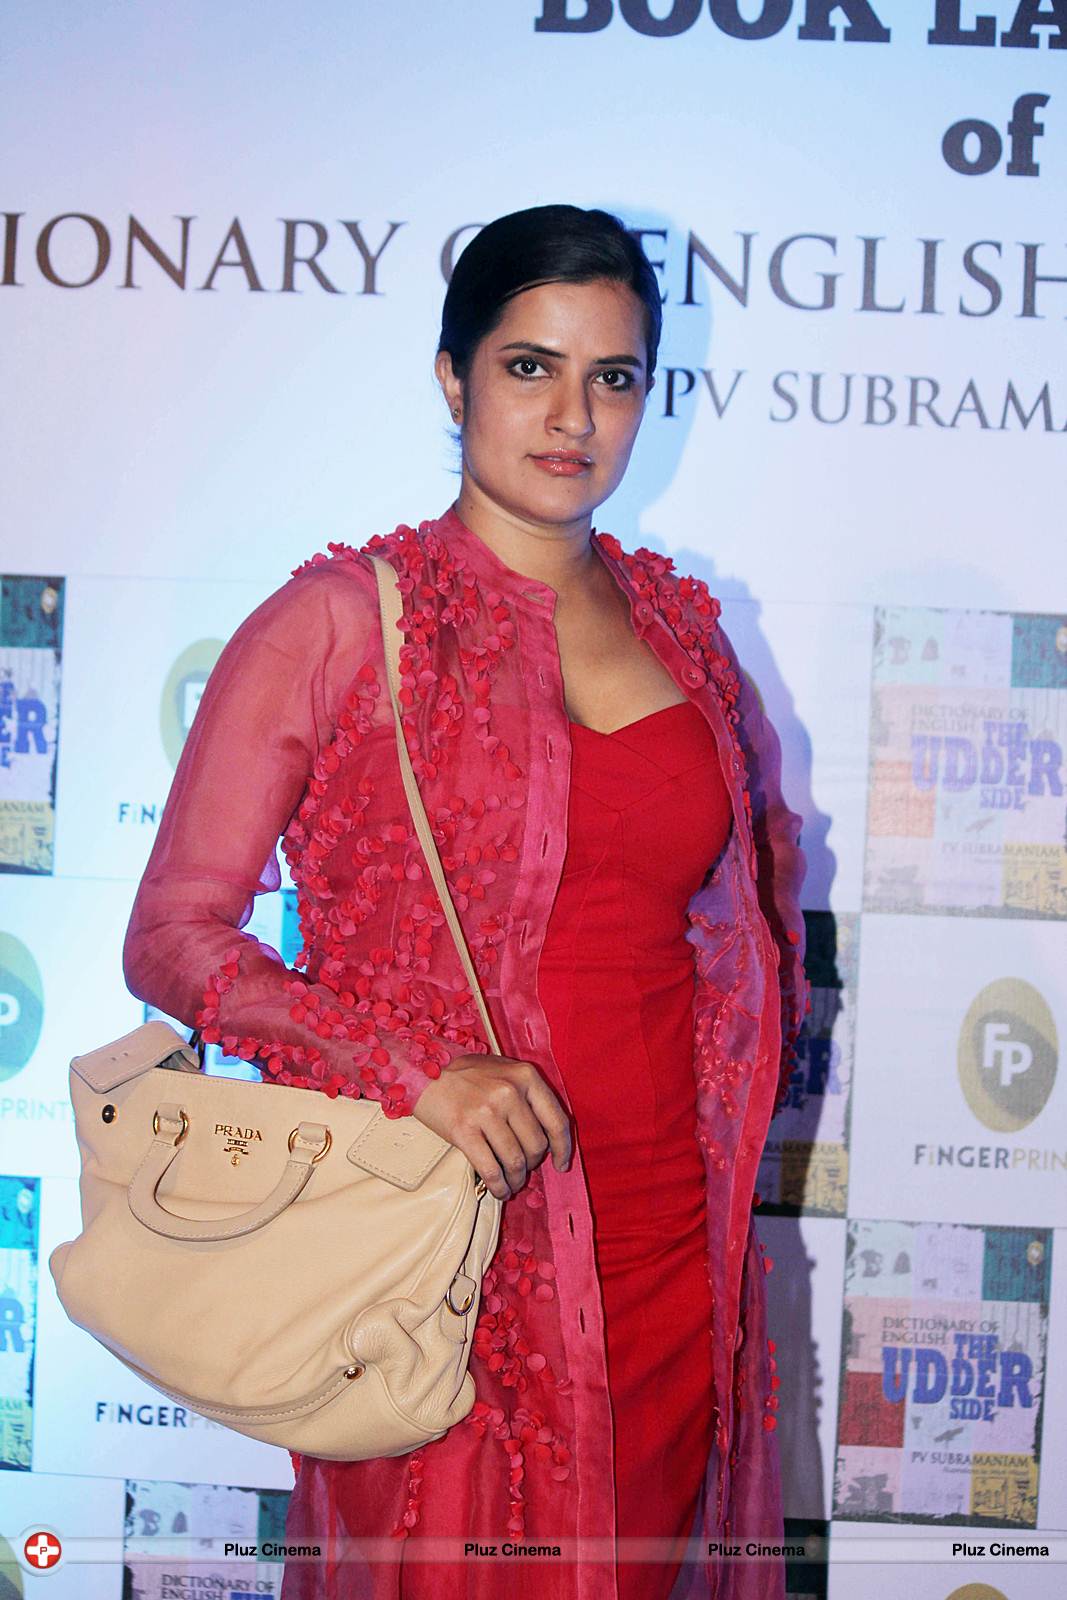 Sona Mohapatra - Author PV Subramaniam's book The Udder Side launch Photos | Picture 553548